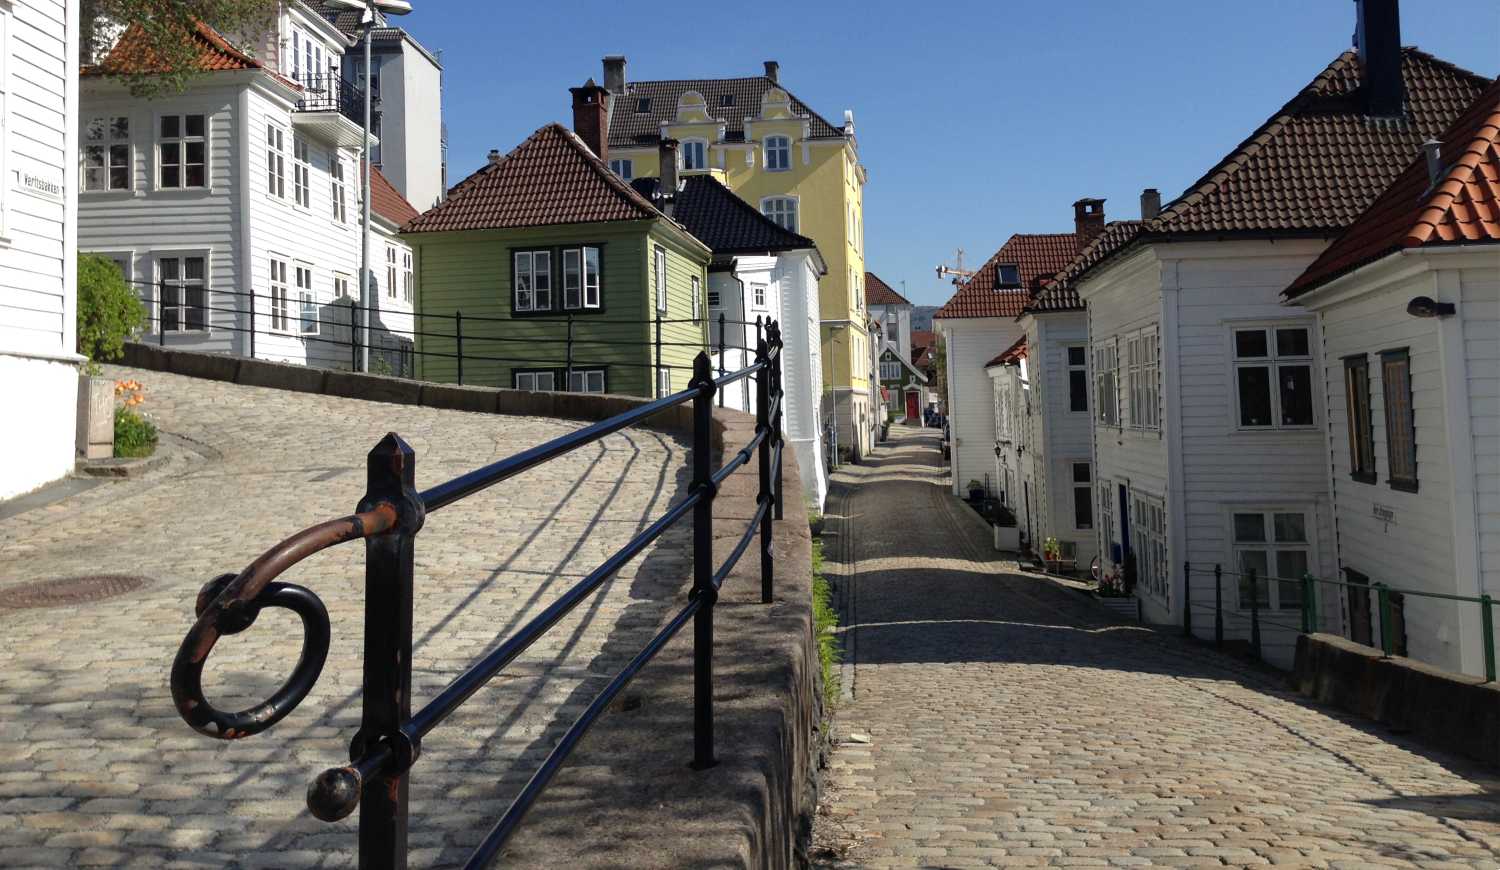 Stay in charming surroundings at Nordnes